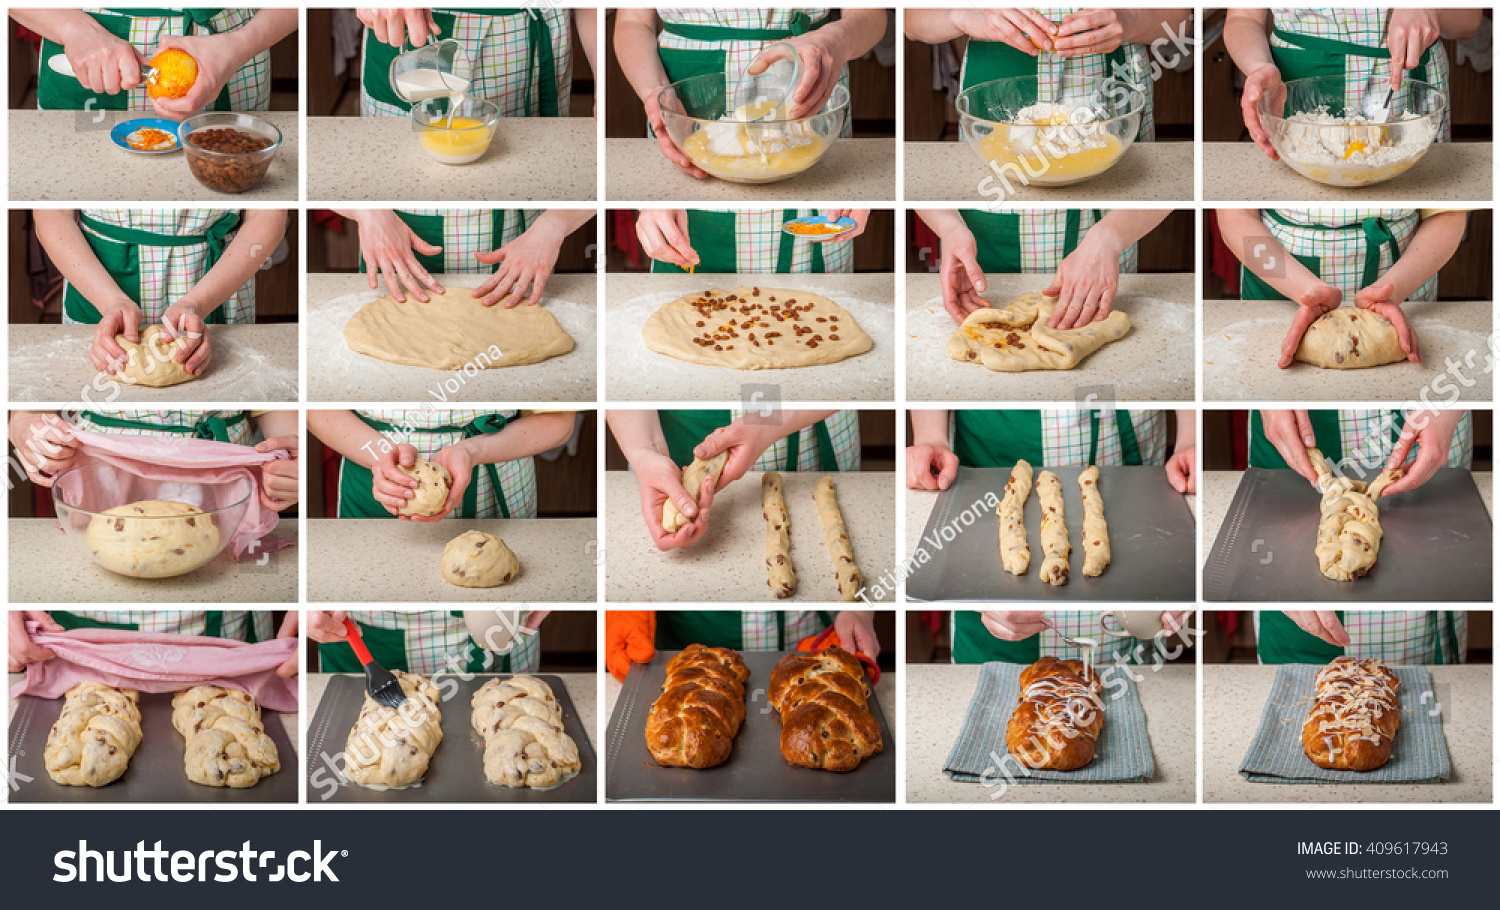 A Step by Step Collage of Making Braided Sweet Bread with Raisins and Orange Zest Topped with Sugar Glaze and Flaked Almonds #409617943